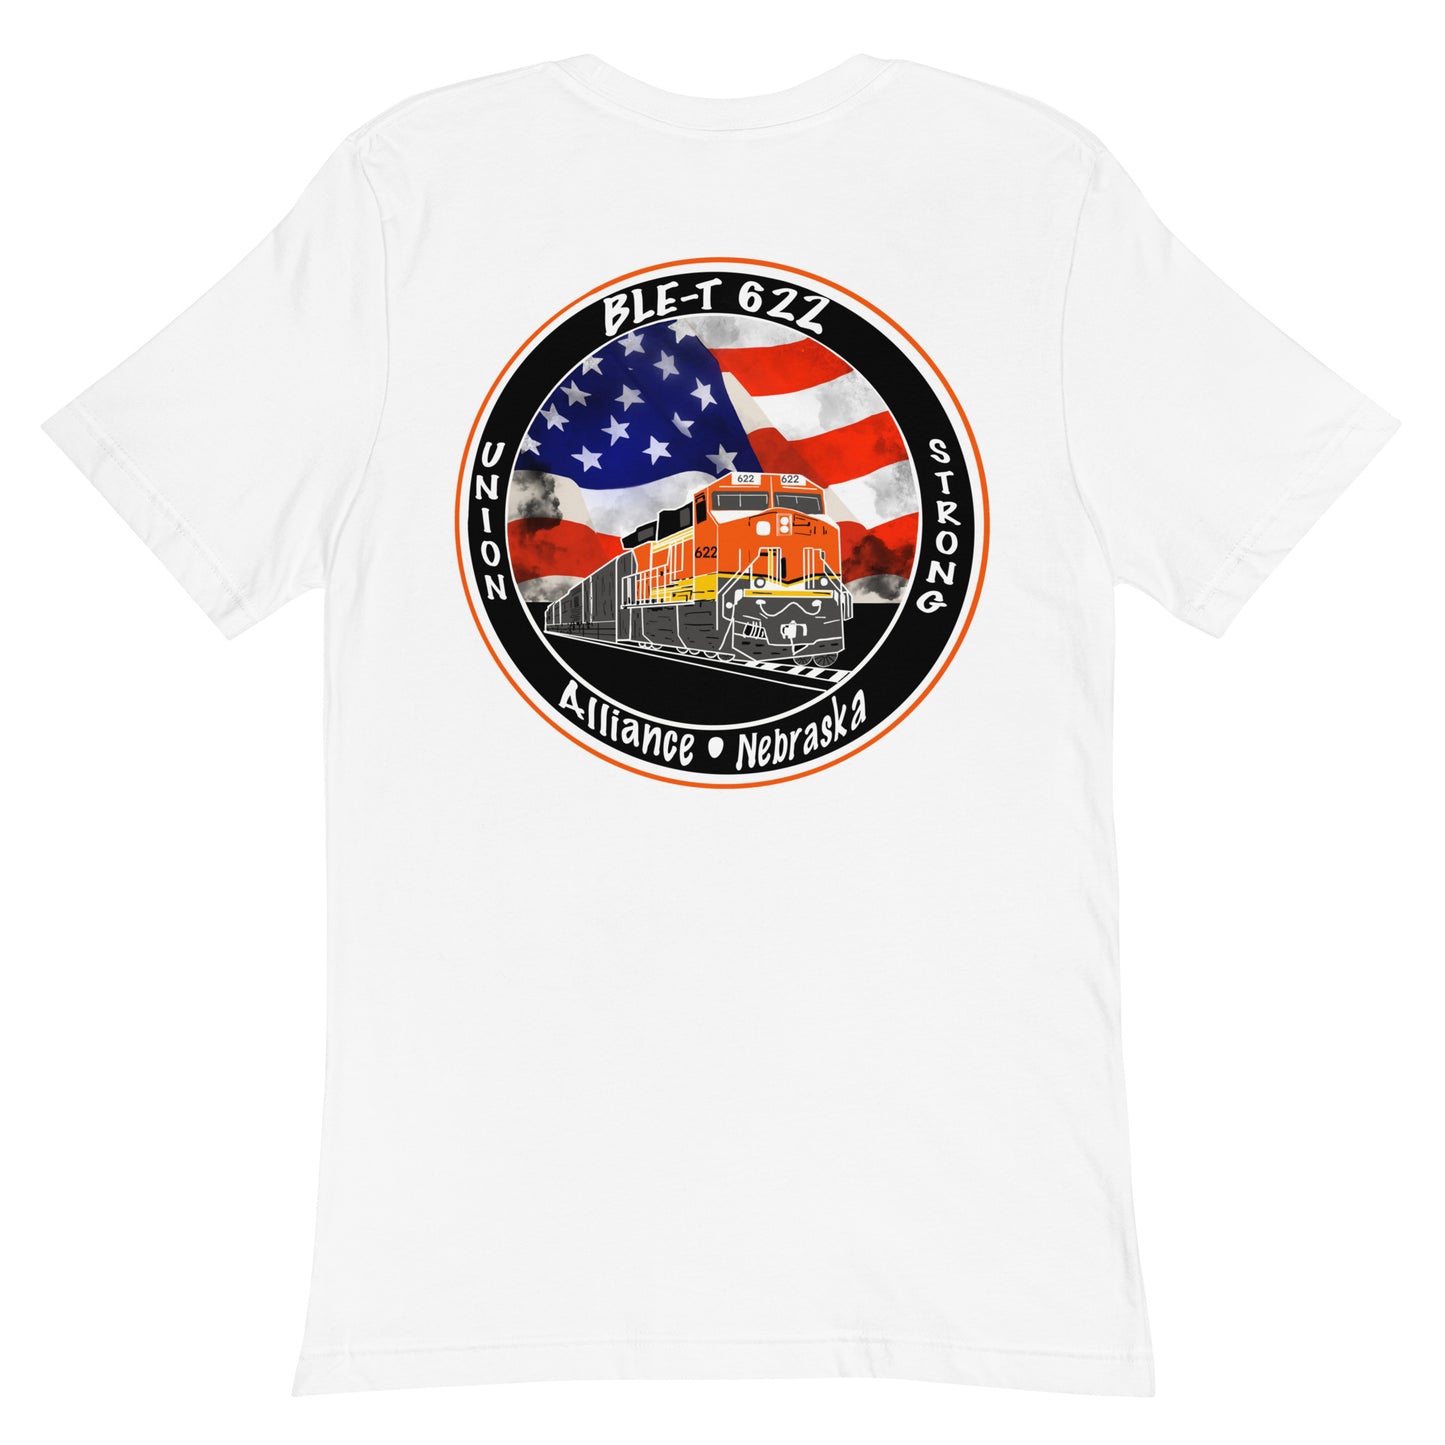 BLE-T 622 Union Strong Pocket Tee